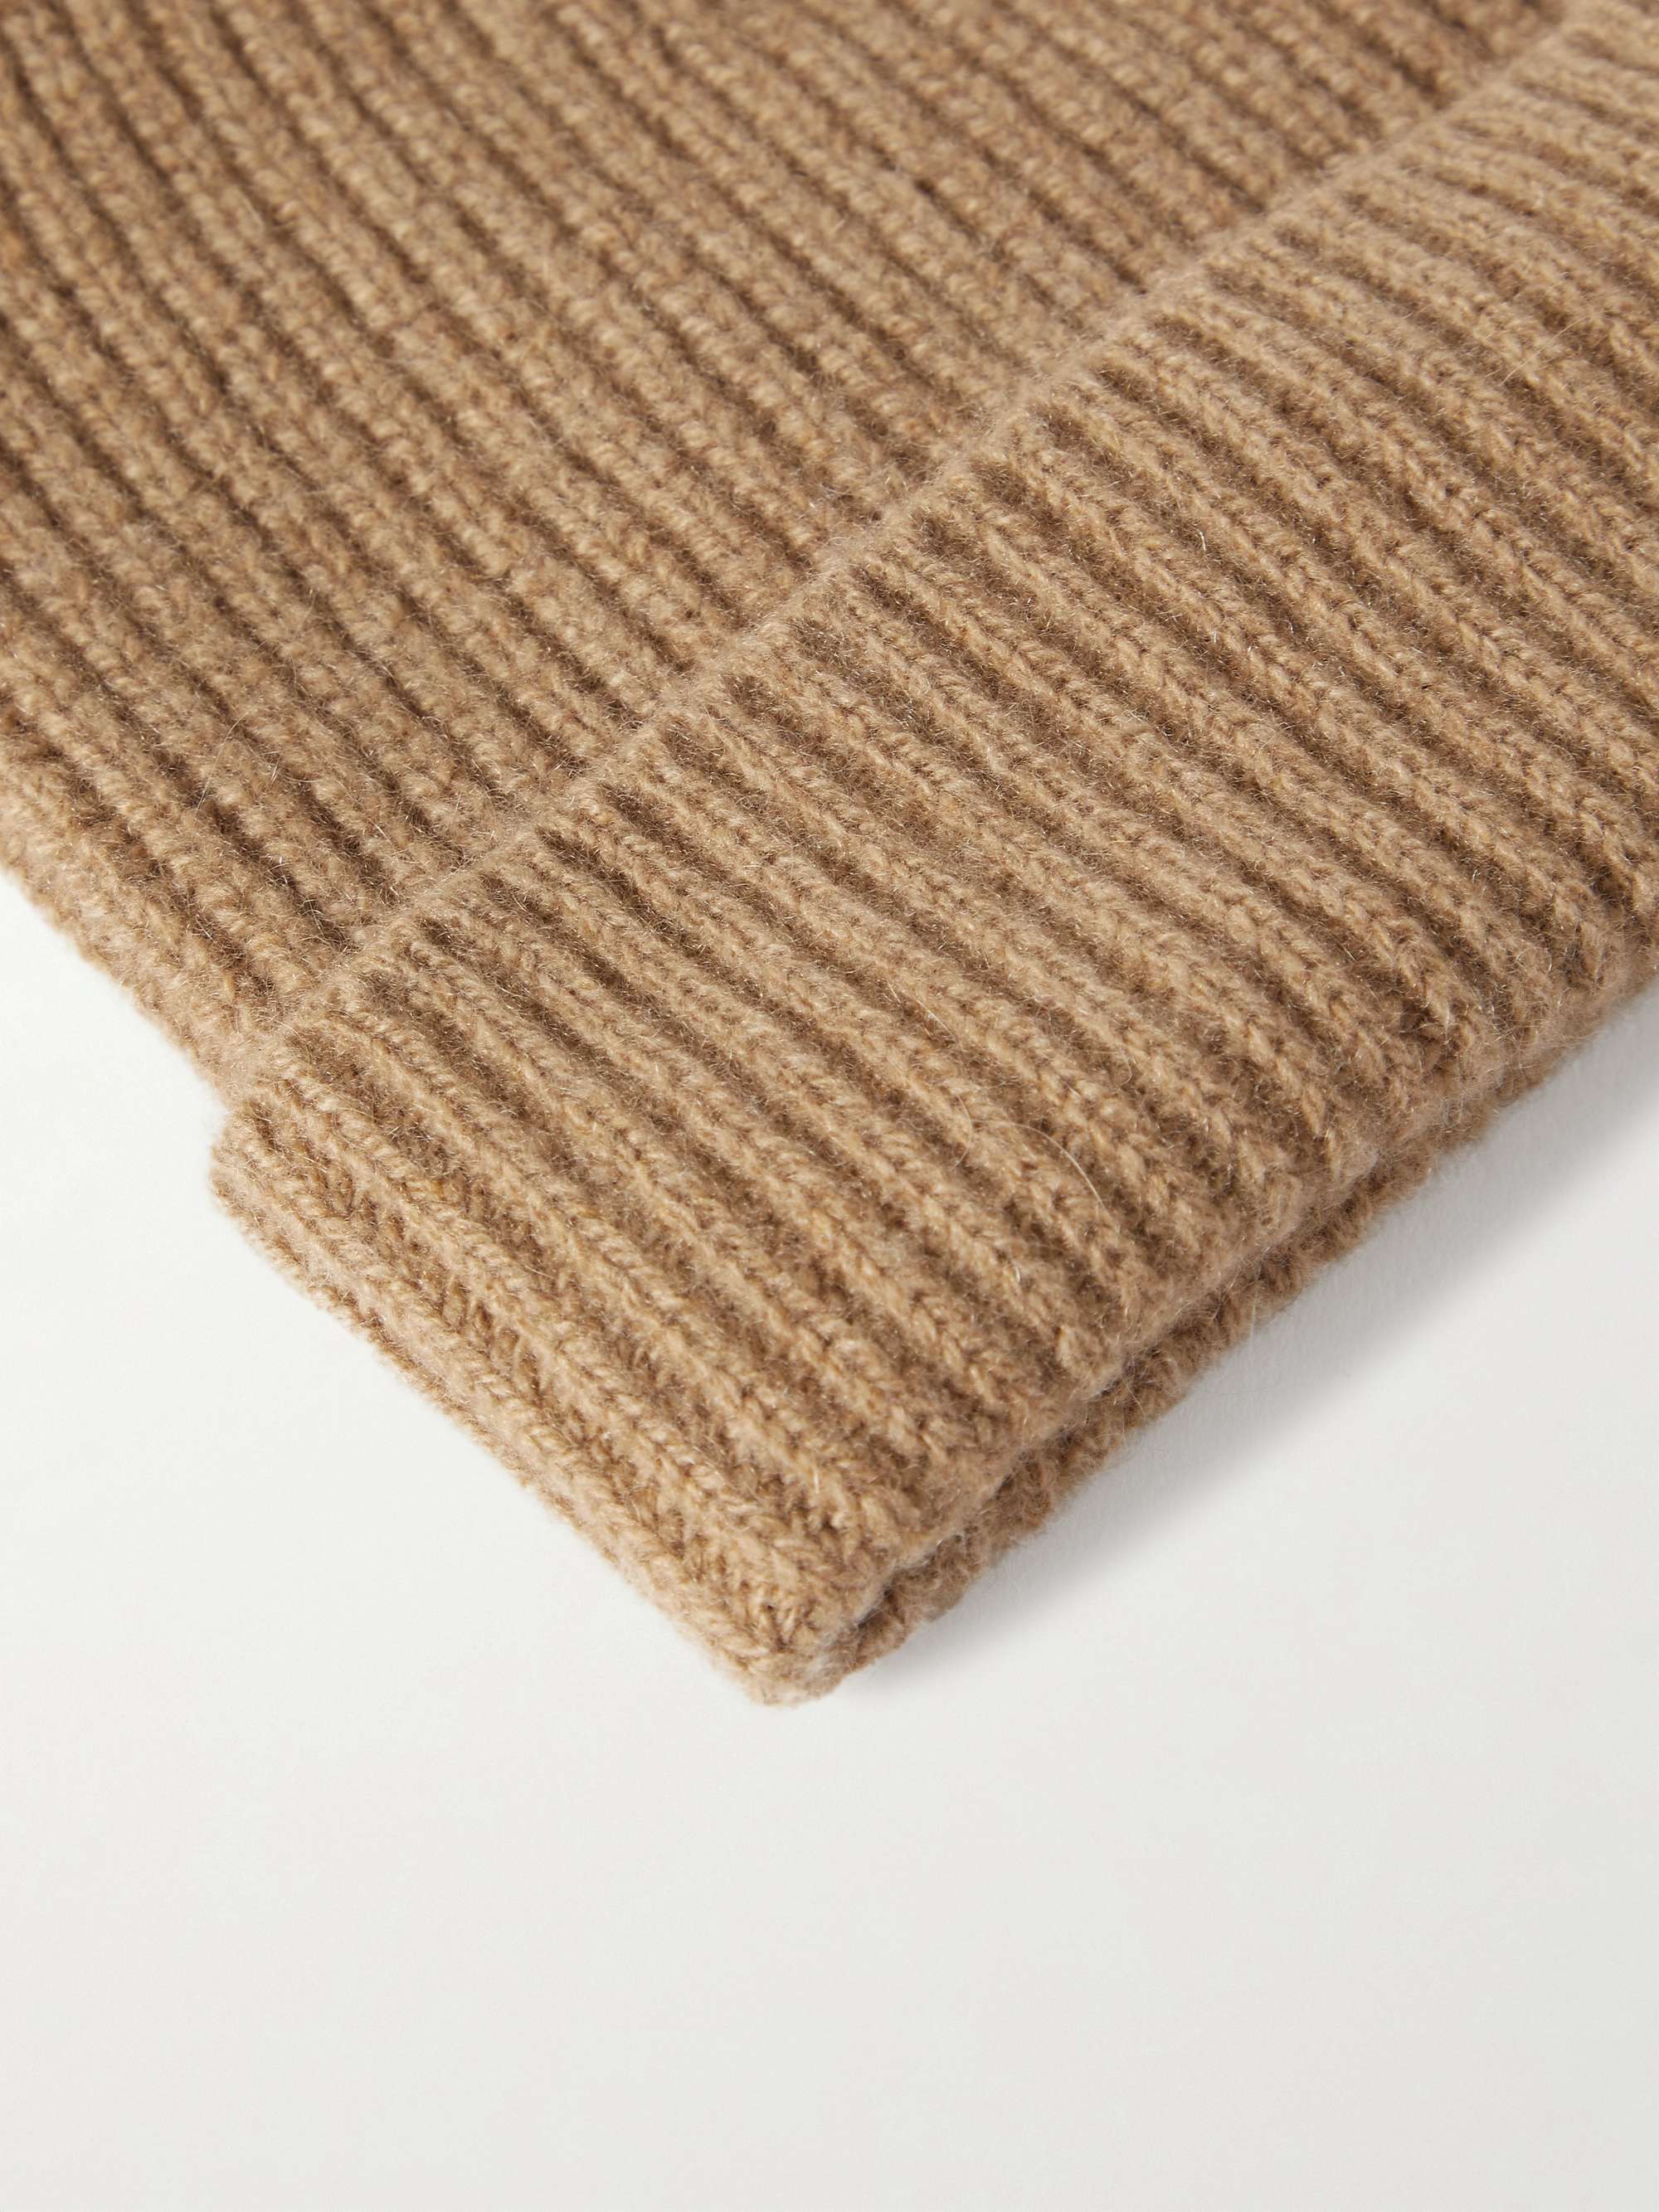 SUNSPEL Ribbed Recycled Cashmere Beanie